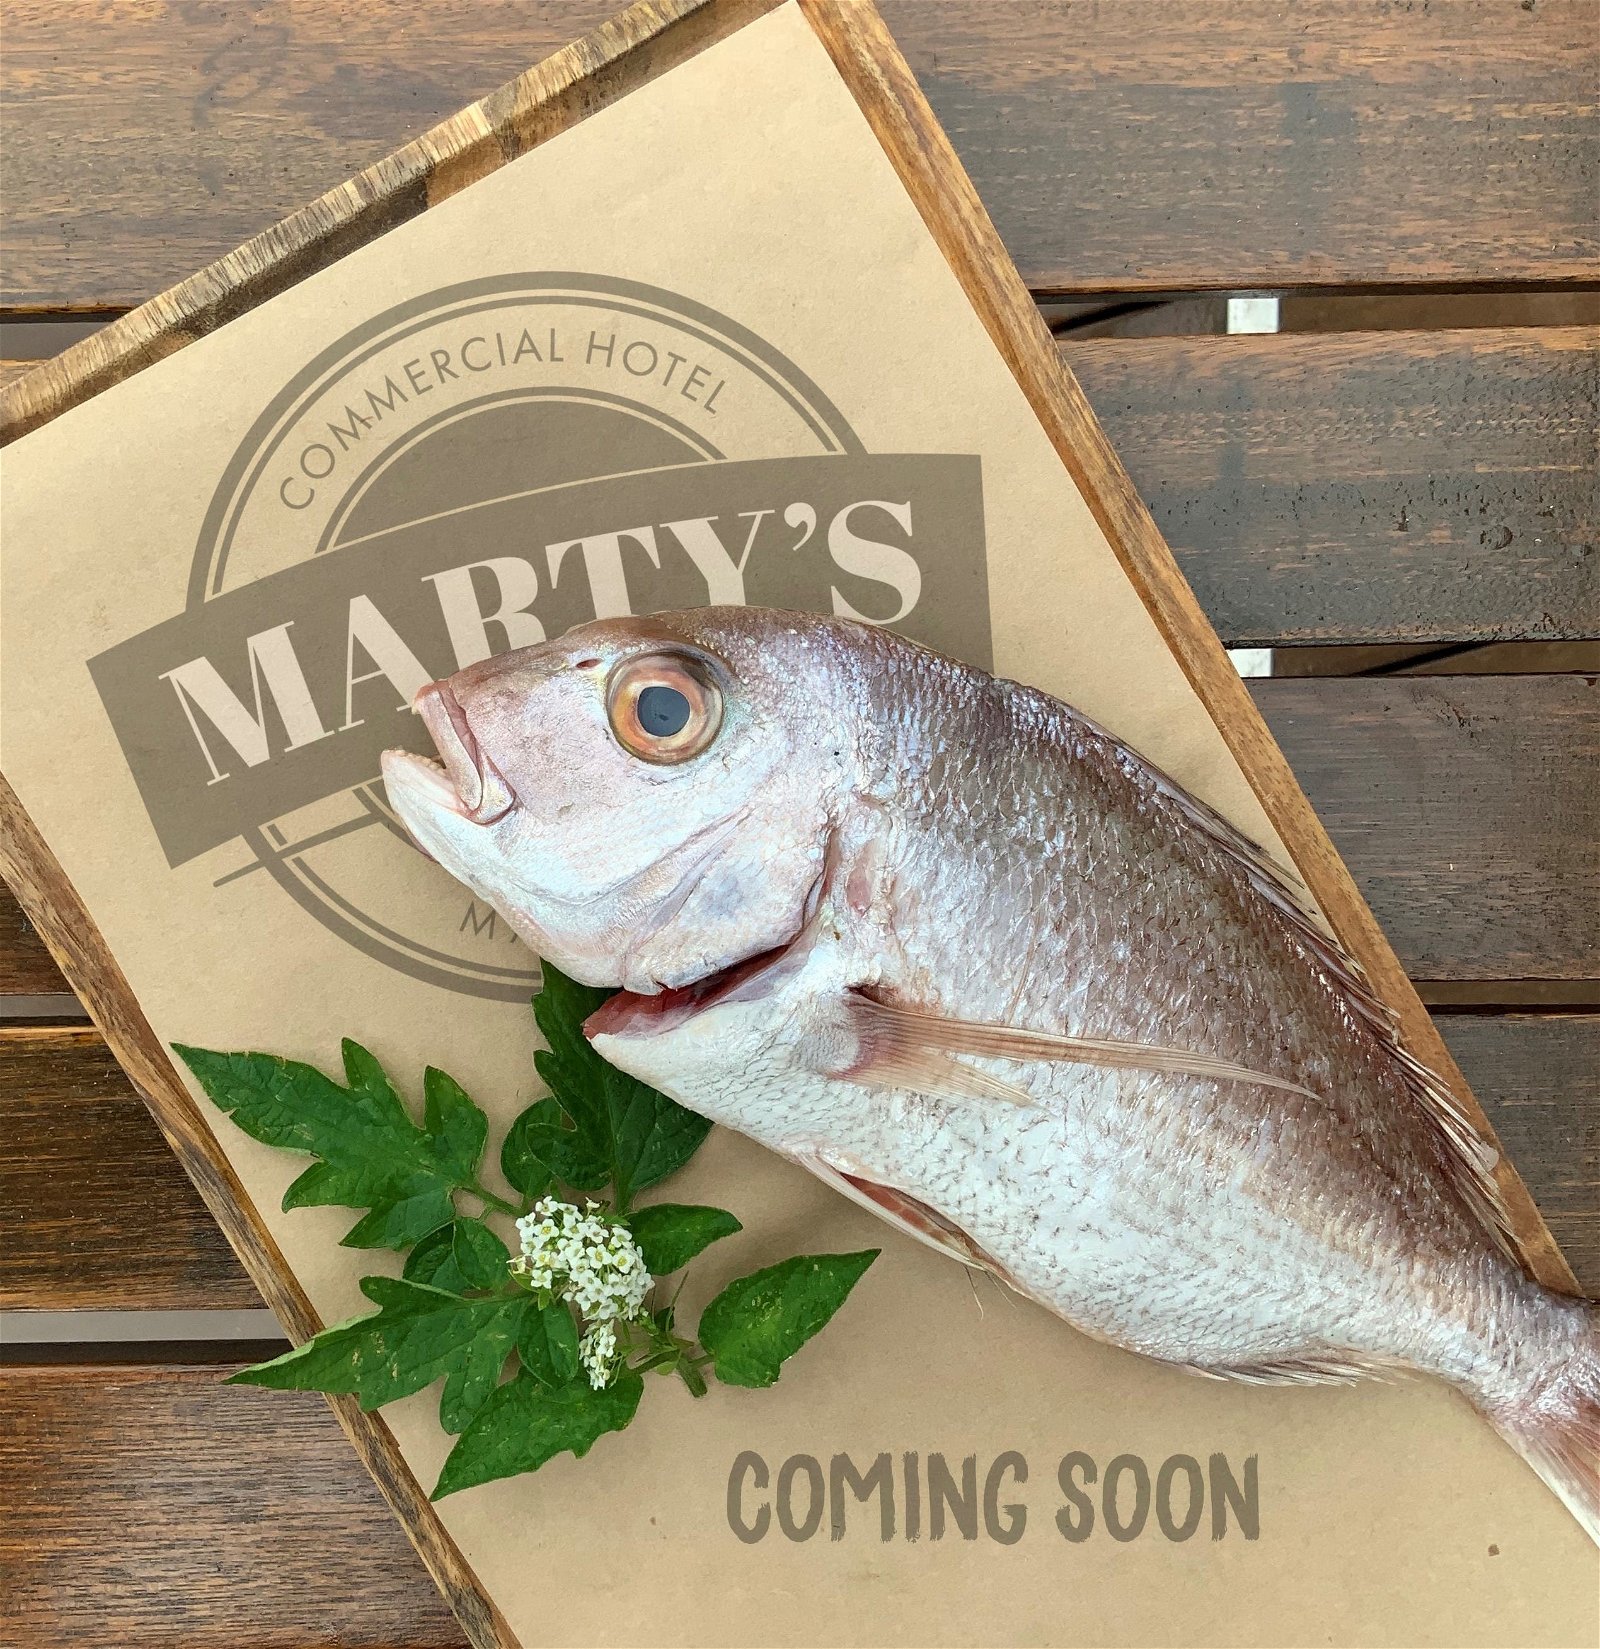 Marty's at The Commercial Hotel - Food Delivery Shop